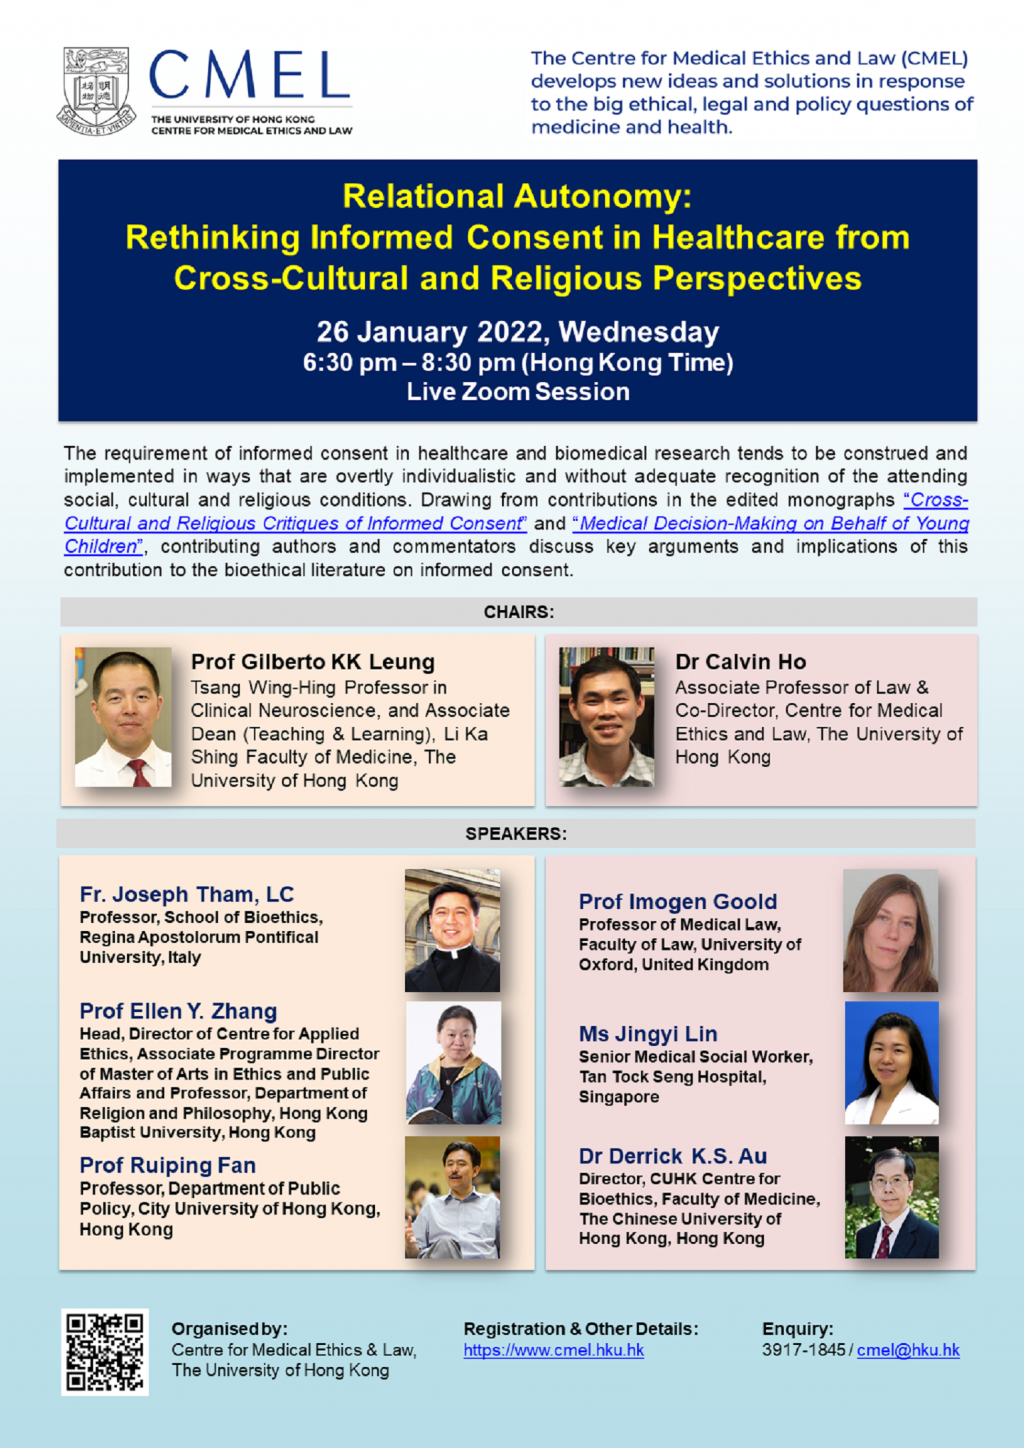 CMEL - Relational Autonomy: Rethinking Informed Consent in Healthcare from Cross-Cultural and Religious Perspectives